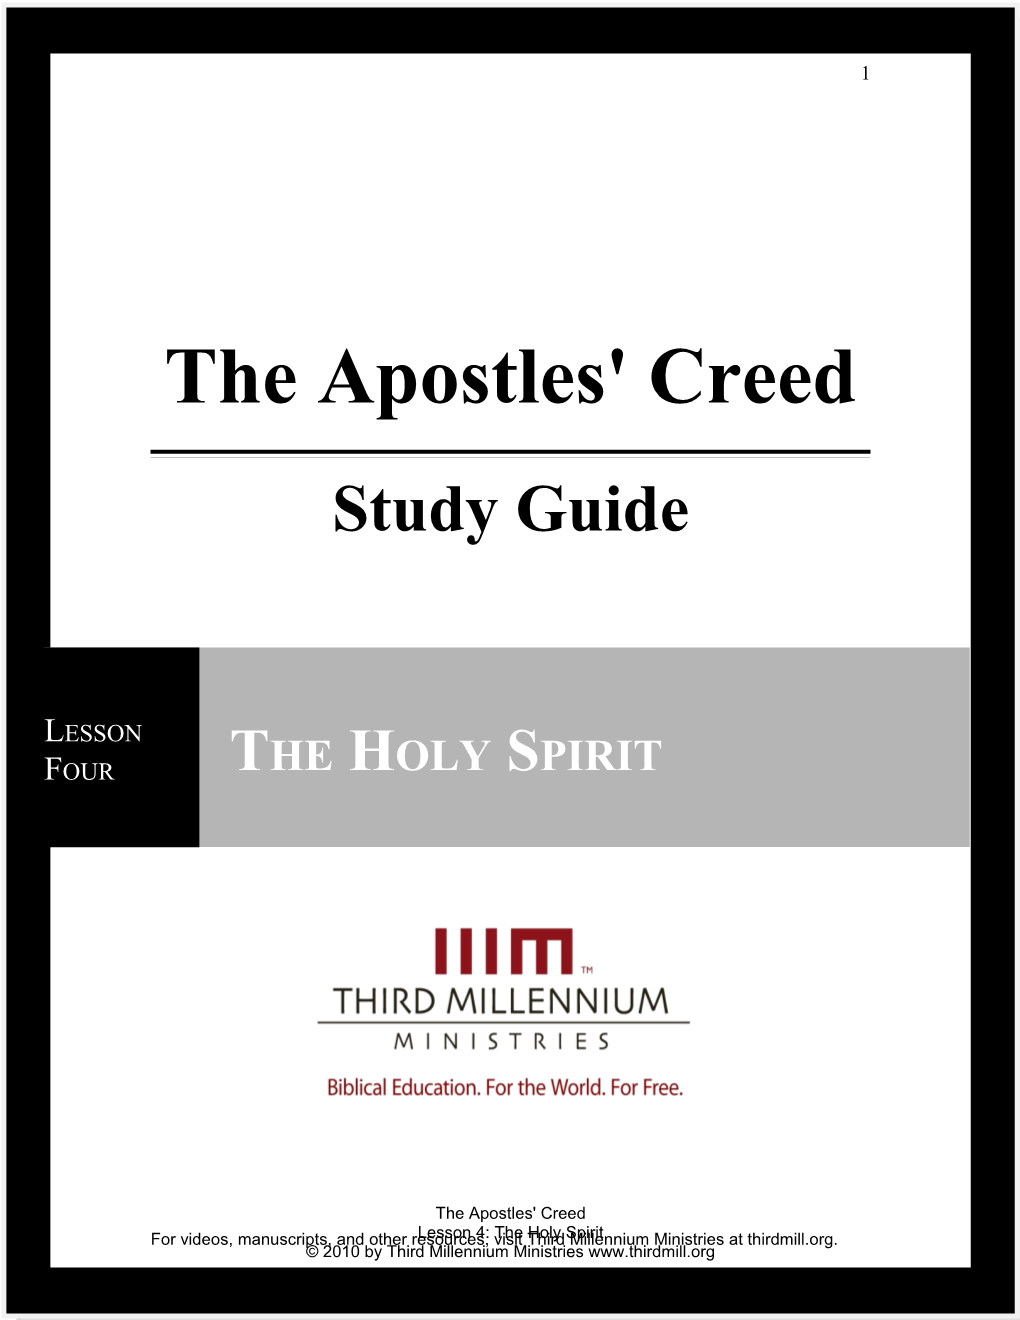 The Apostles' Creed s1